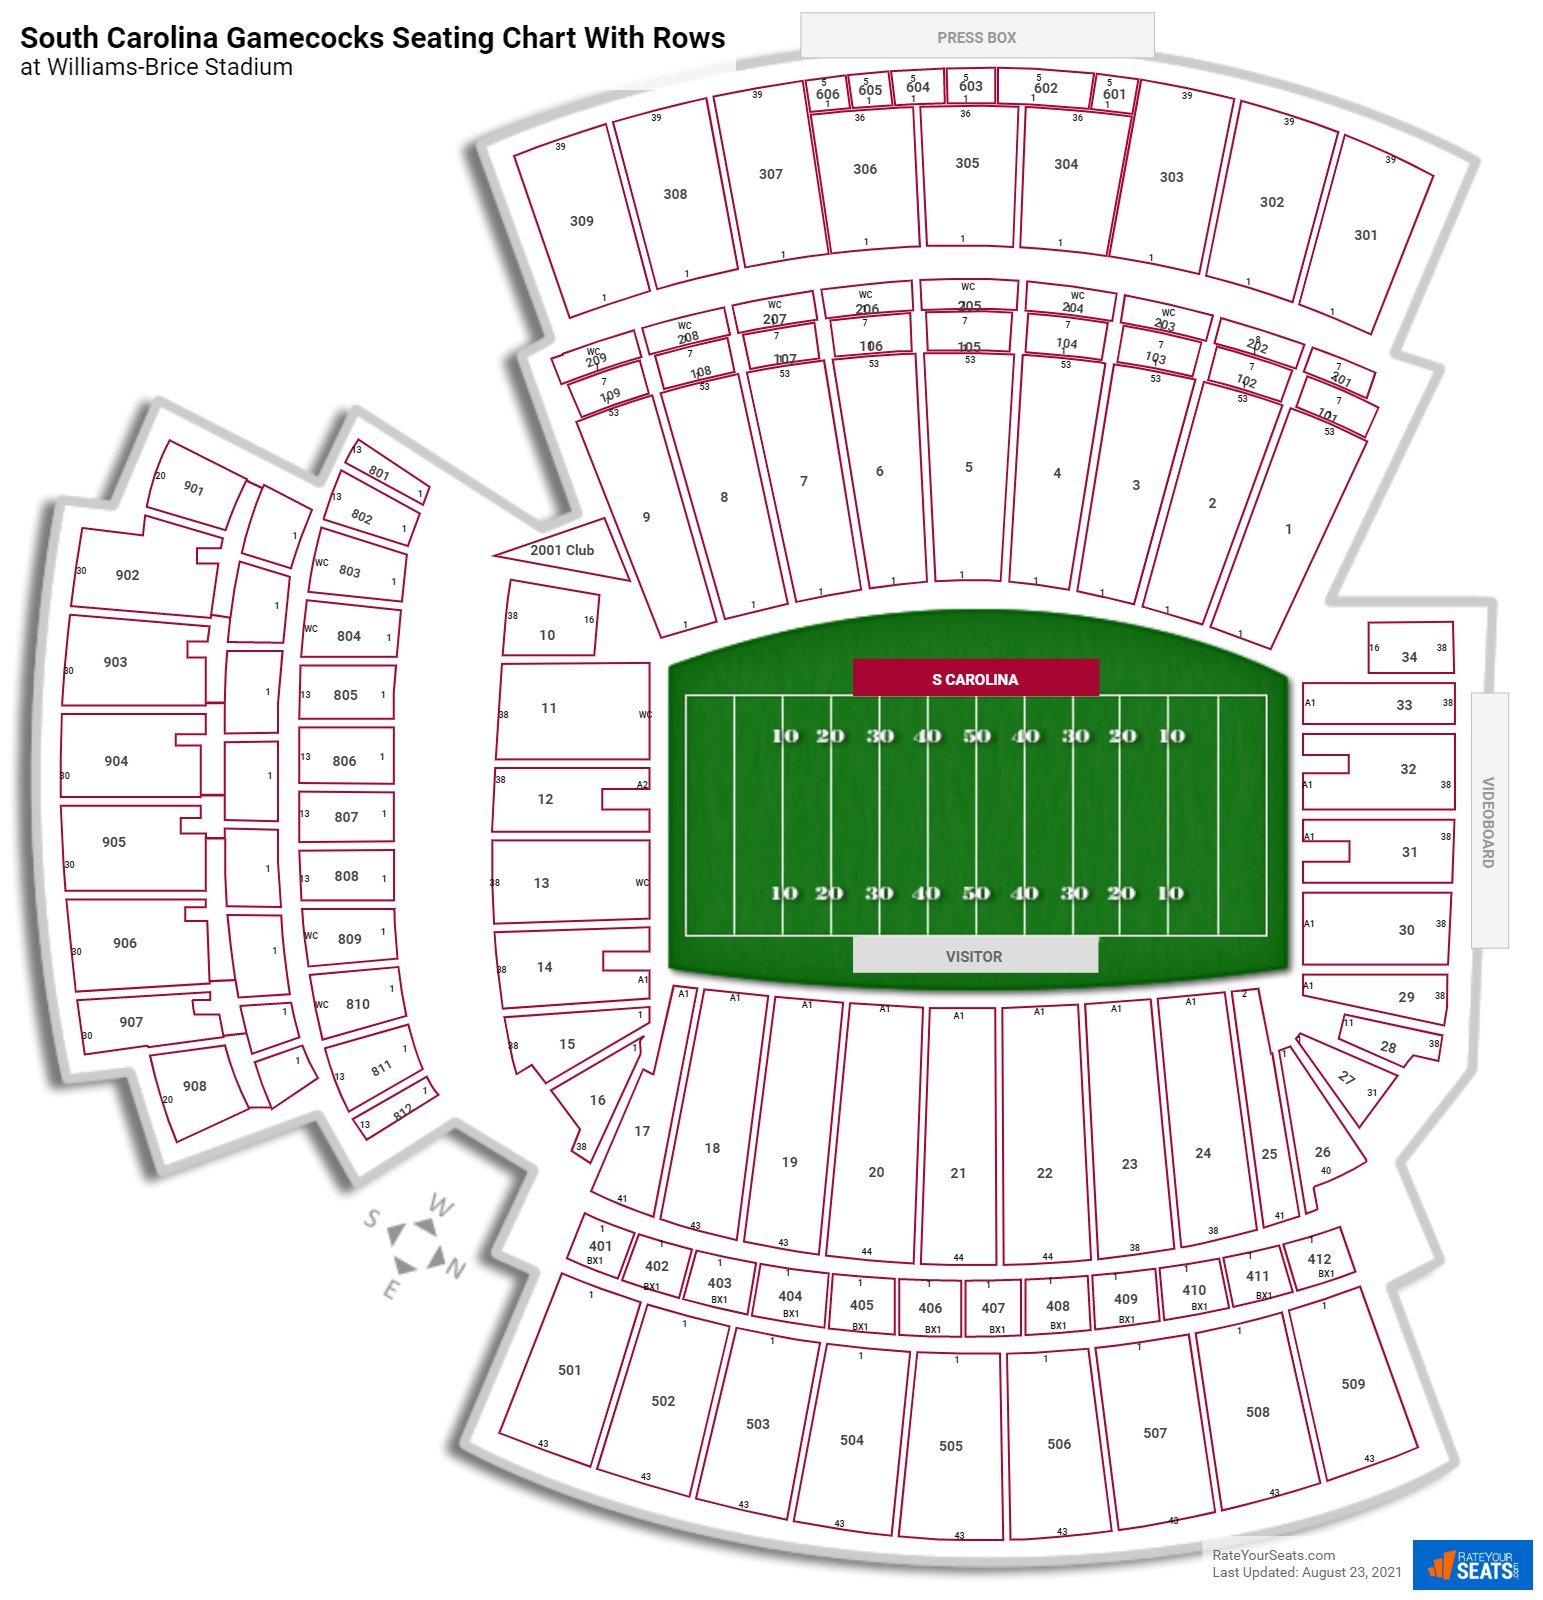 Williams-Brice Stadium seating chart with row numbers